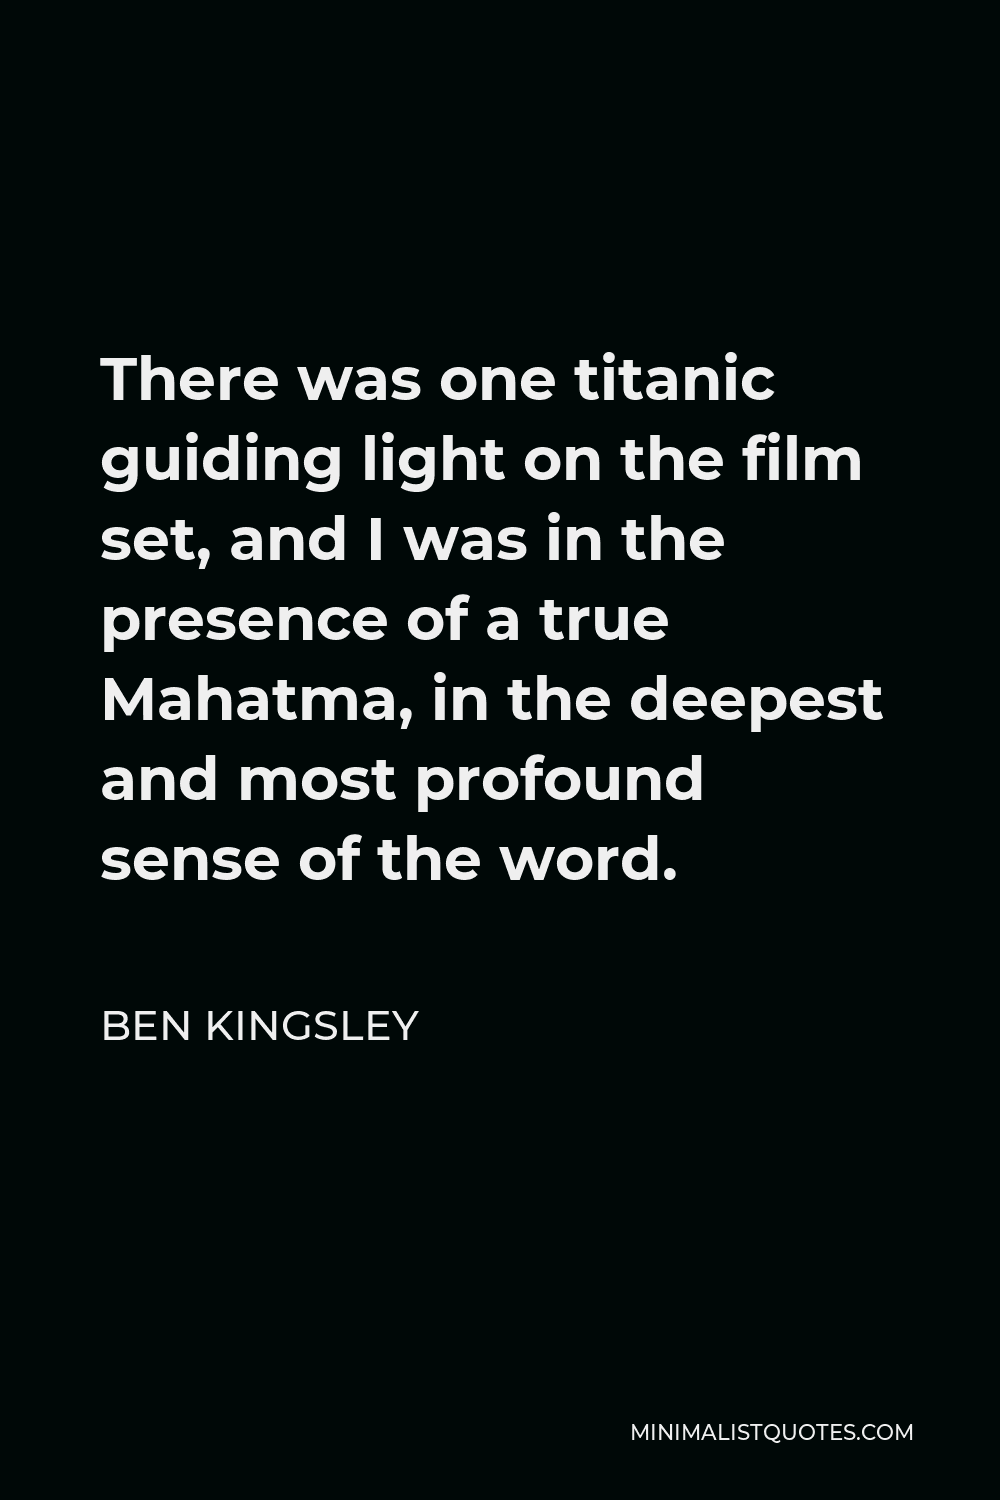 Ben Kingsley Quote - There was one titanic guiding light on the film set, and I was in the presence of a true Mahatma, in the deepest and most profound sense of the word.